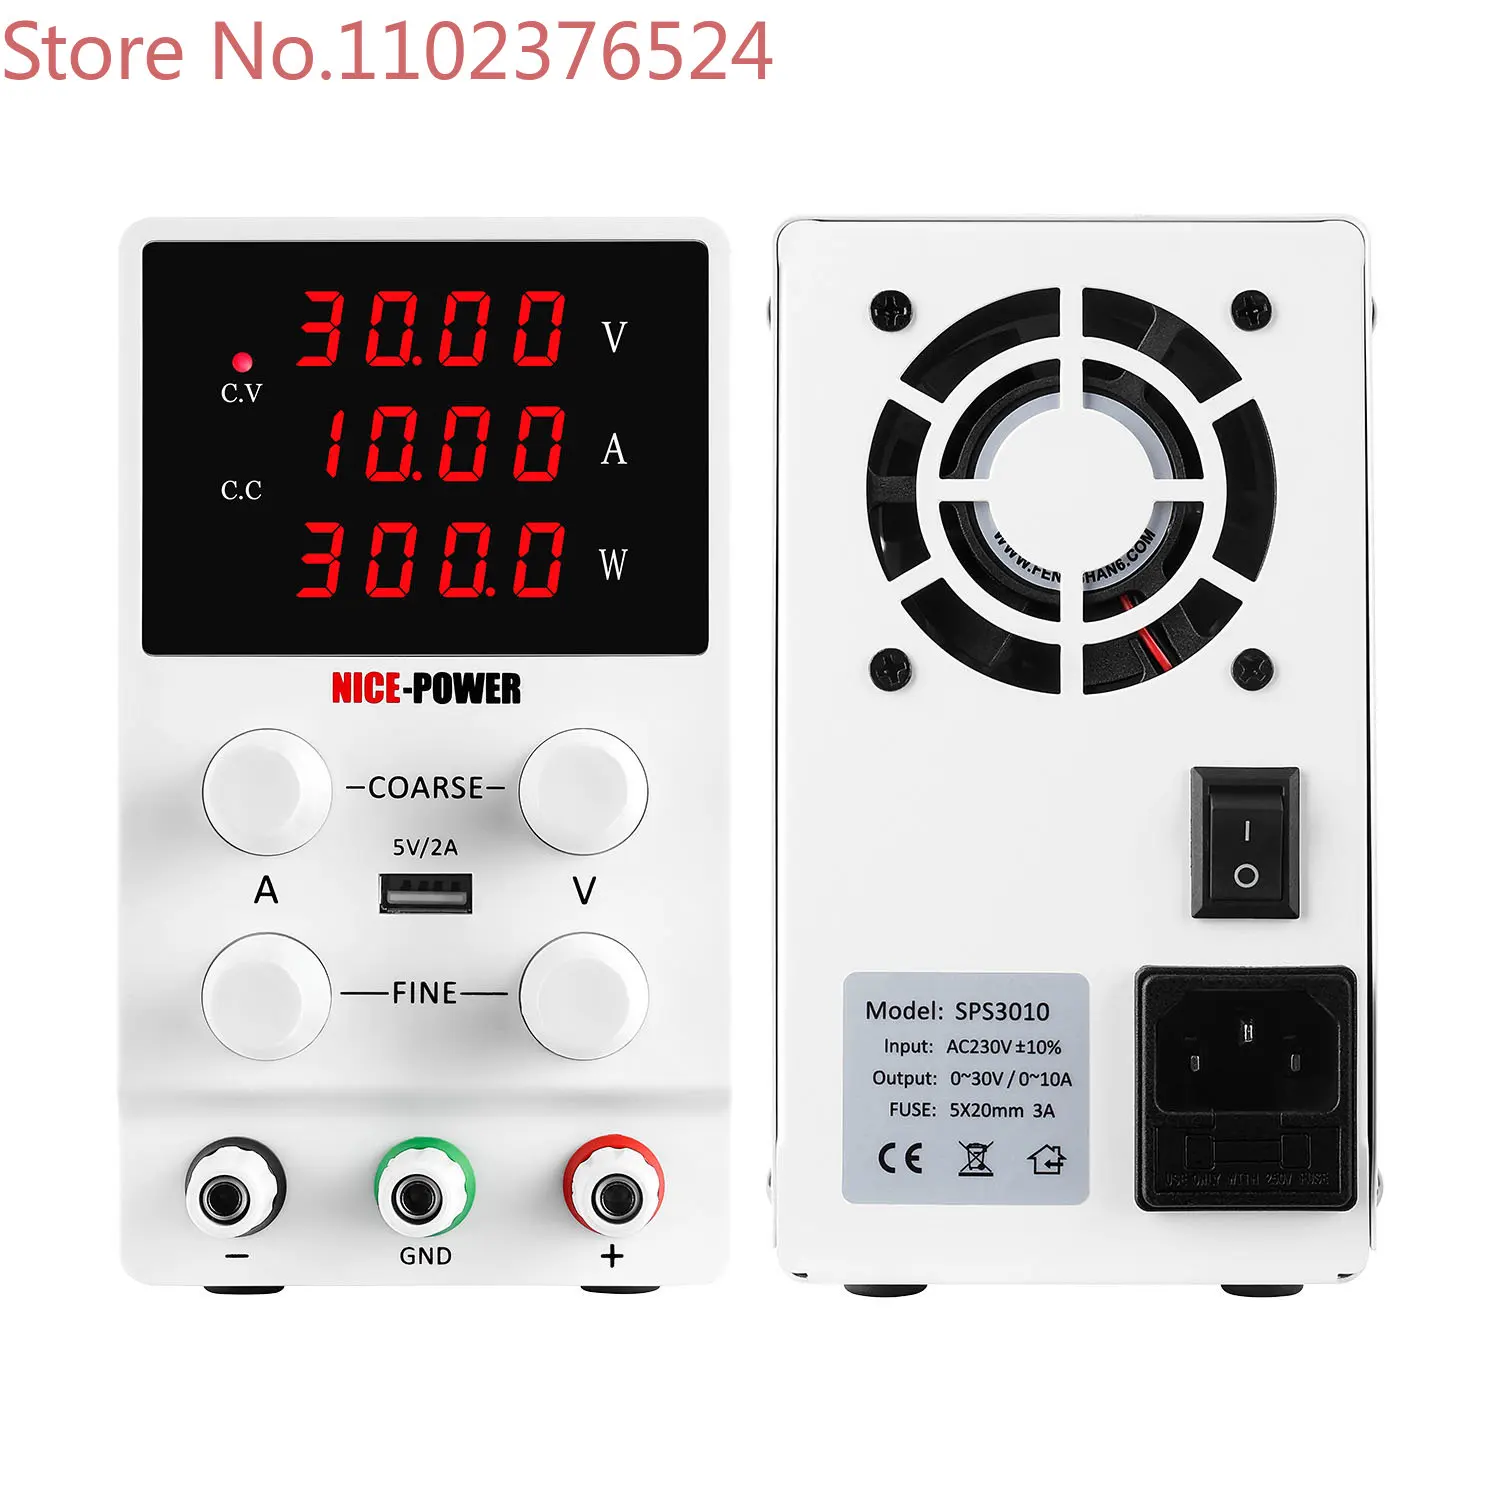 

China Factory Supply Nice Power Sps3010 30V 10A Display Power Switch For School Lab Teach Industrial Power Supply